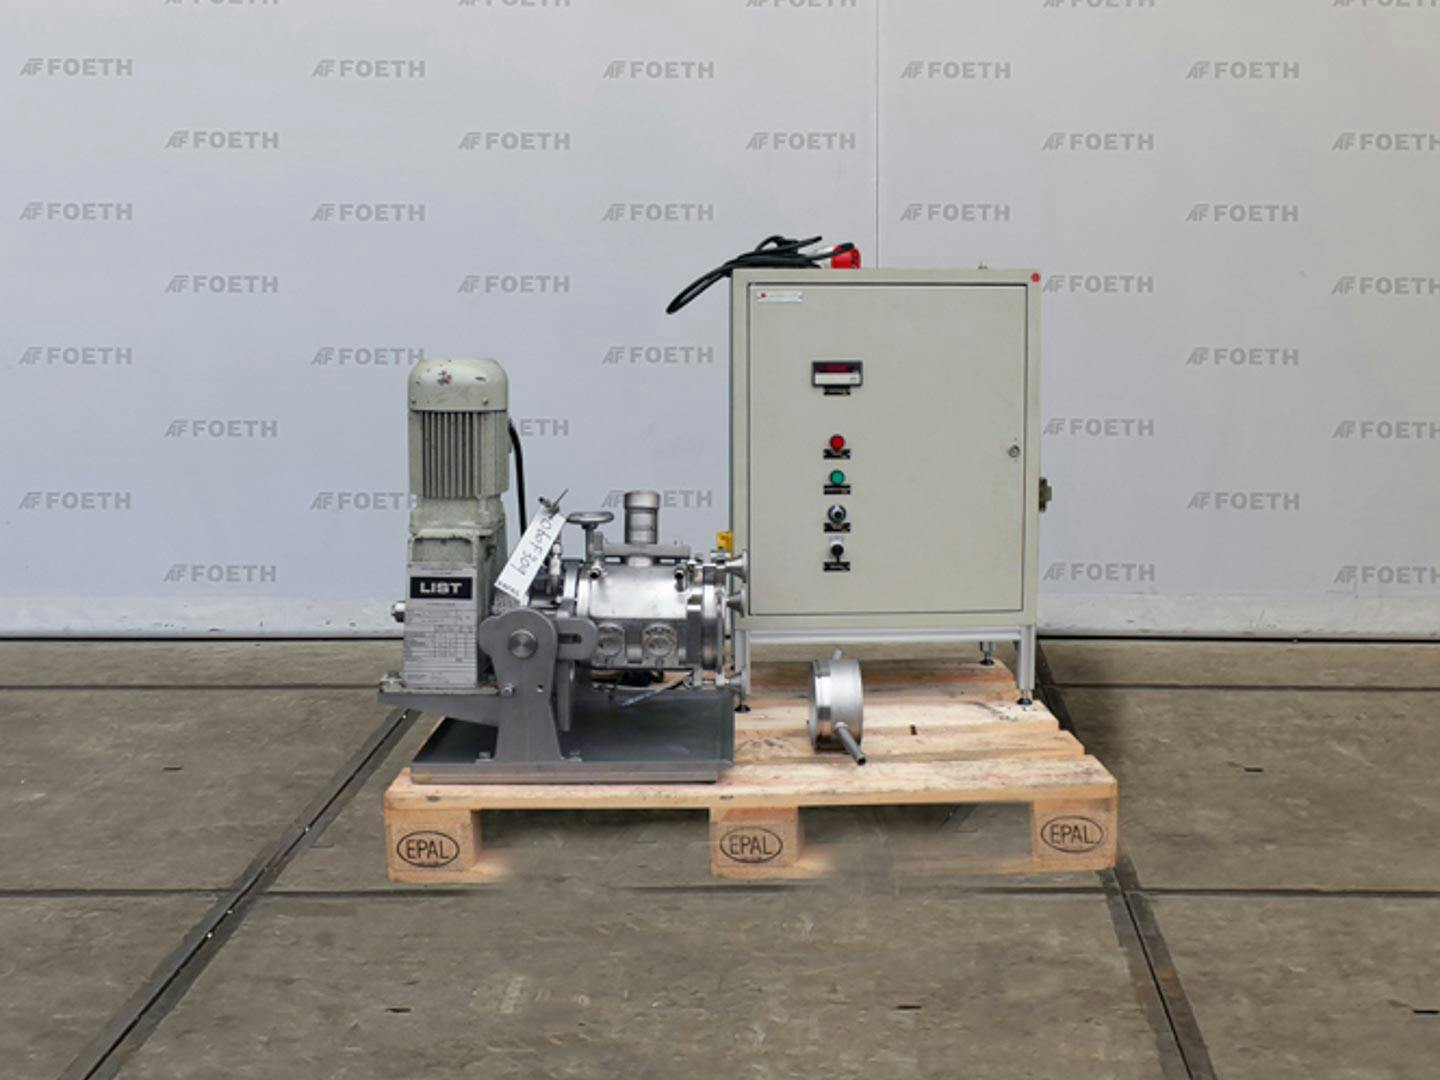 List DISCOTHERM - Paddle dryer - image 1